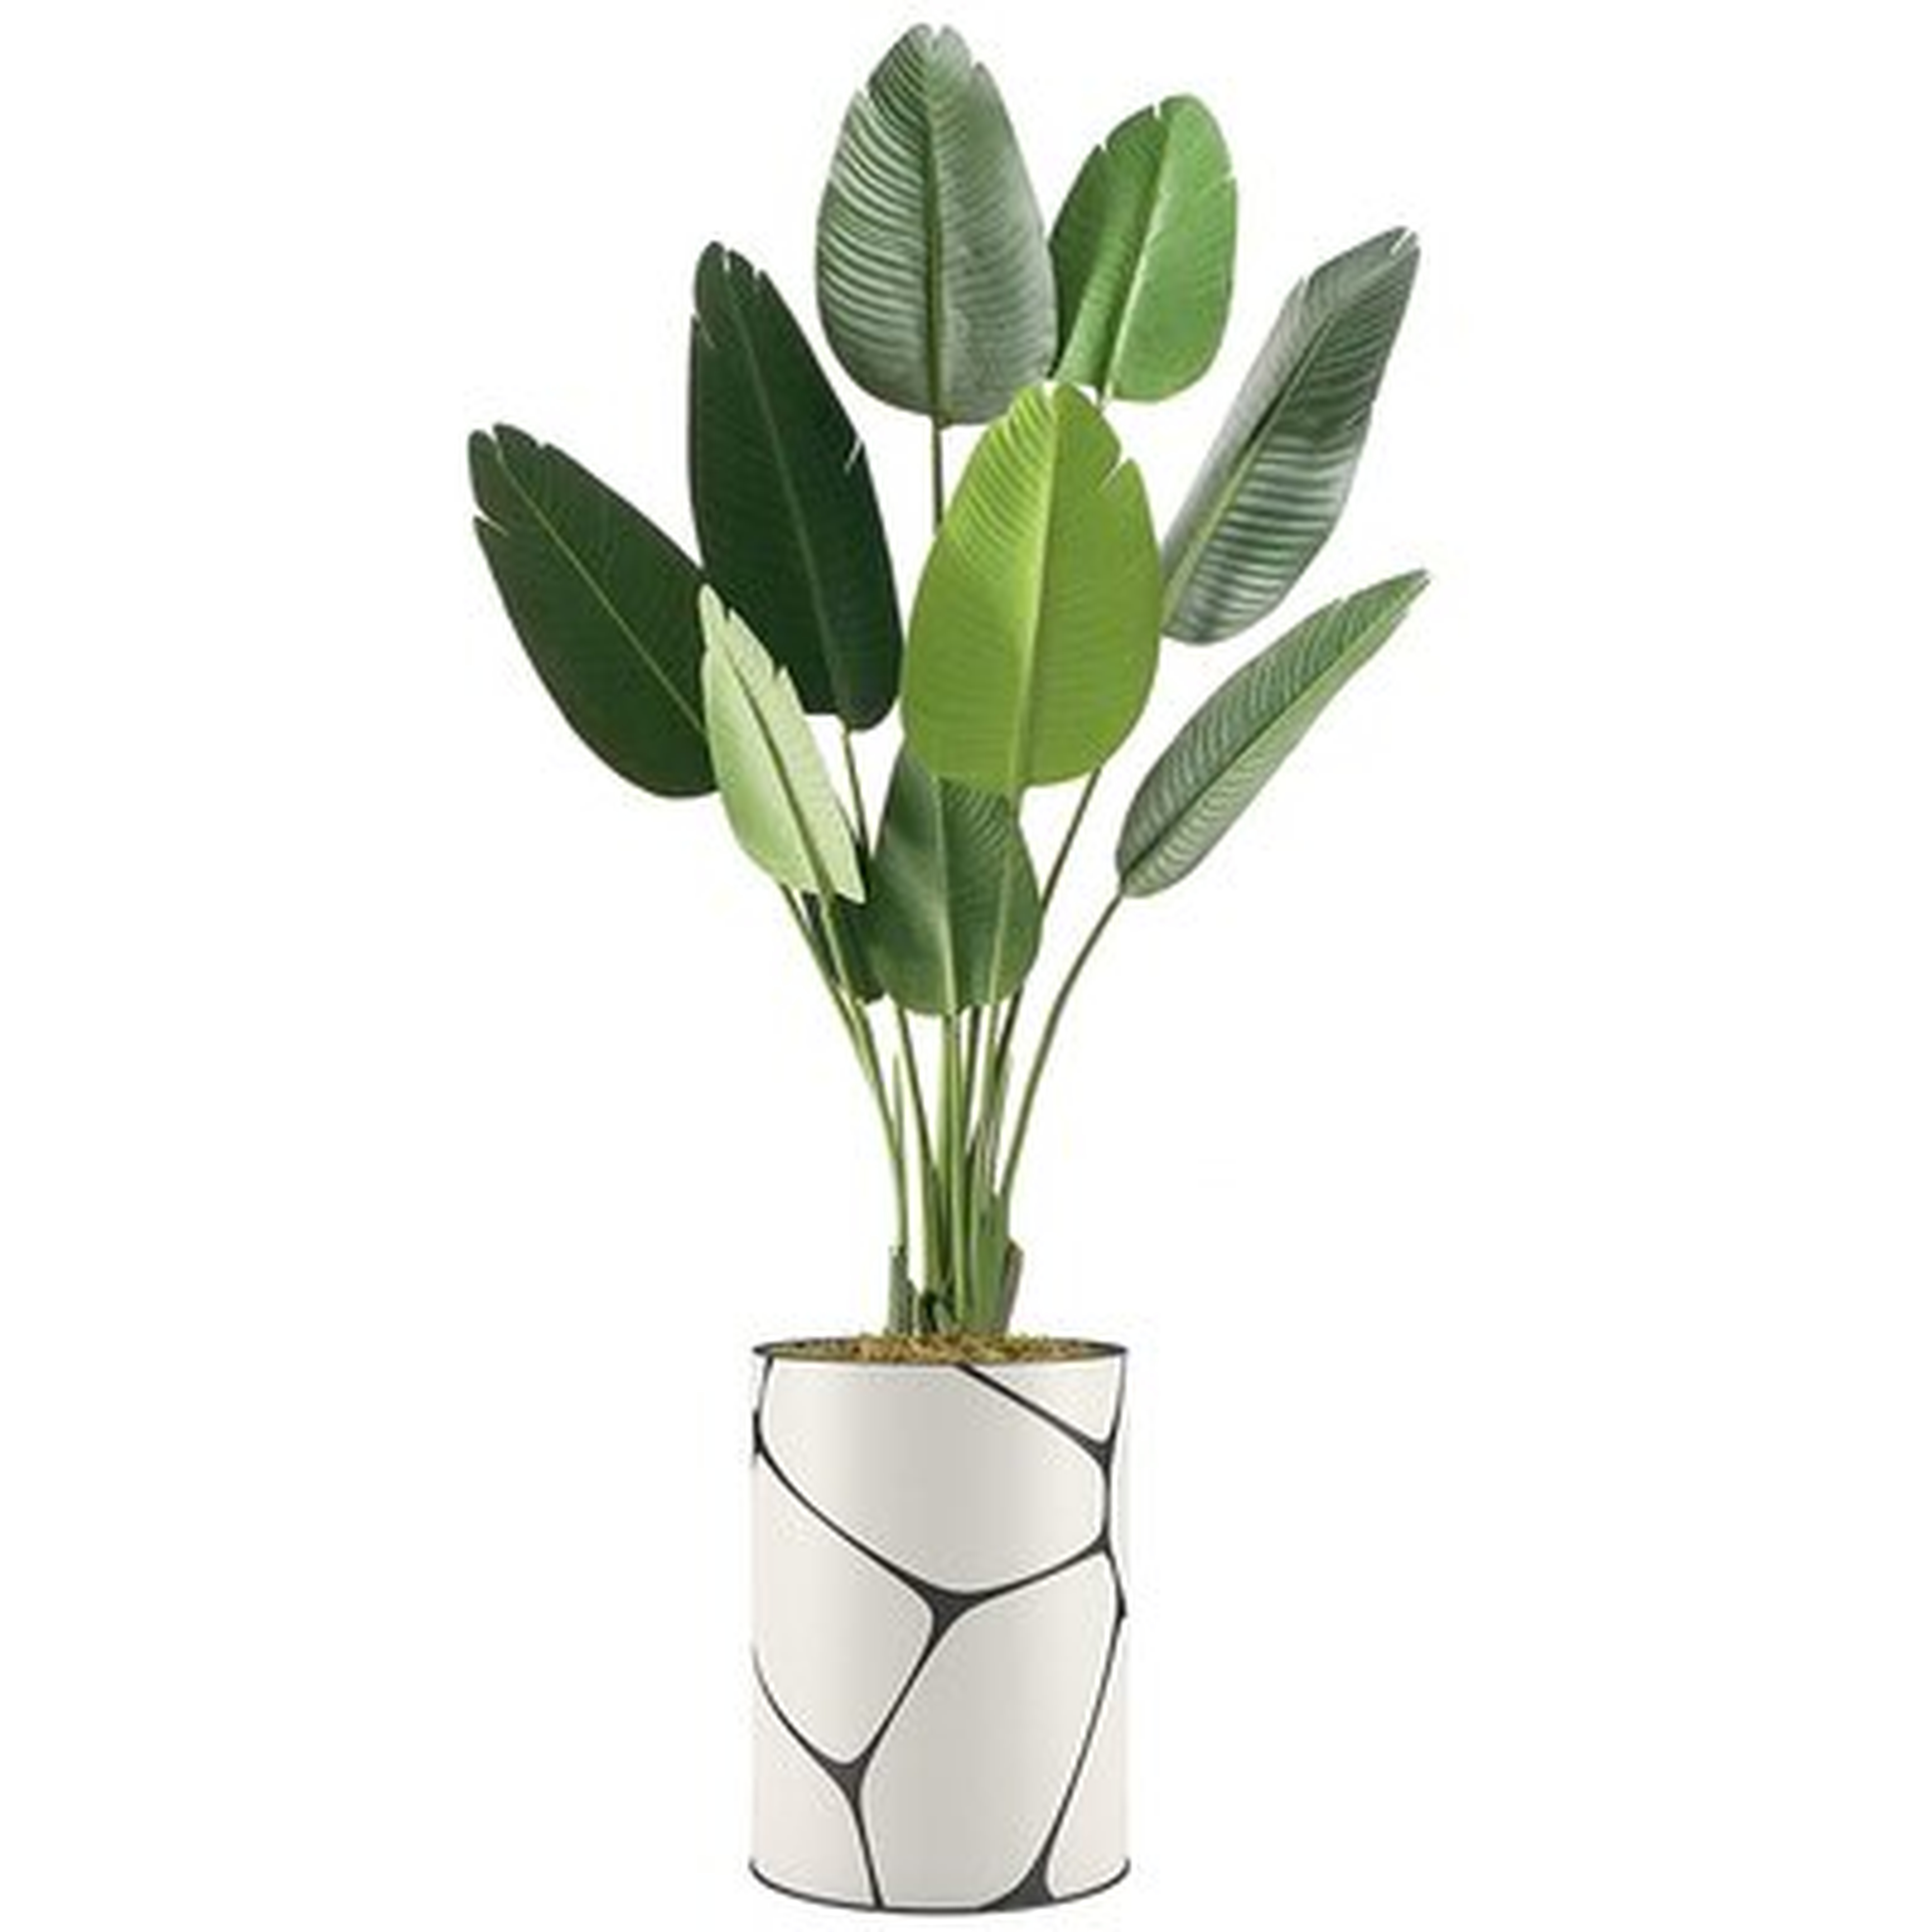 Primrue Floor Plants Artificial Trees For Home, Fake Bird Of Paradise Plant With Vase - Large Size 72" Overall - Wayfair